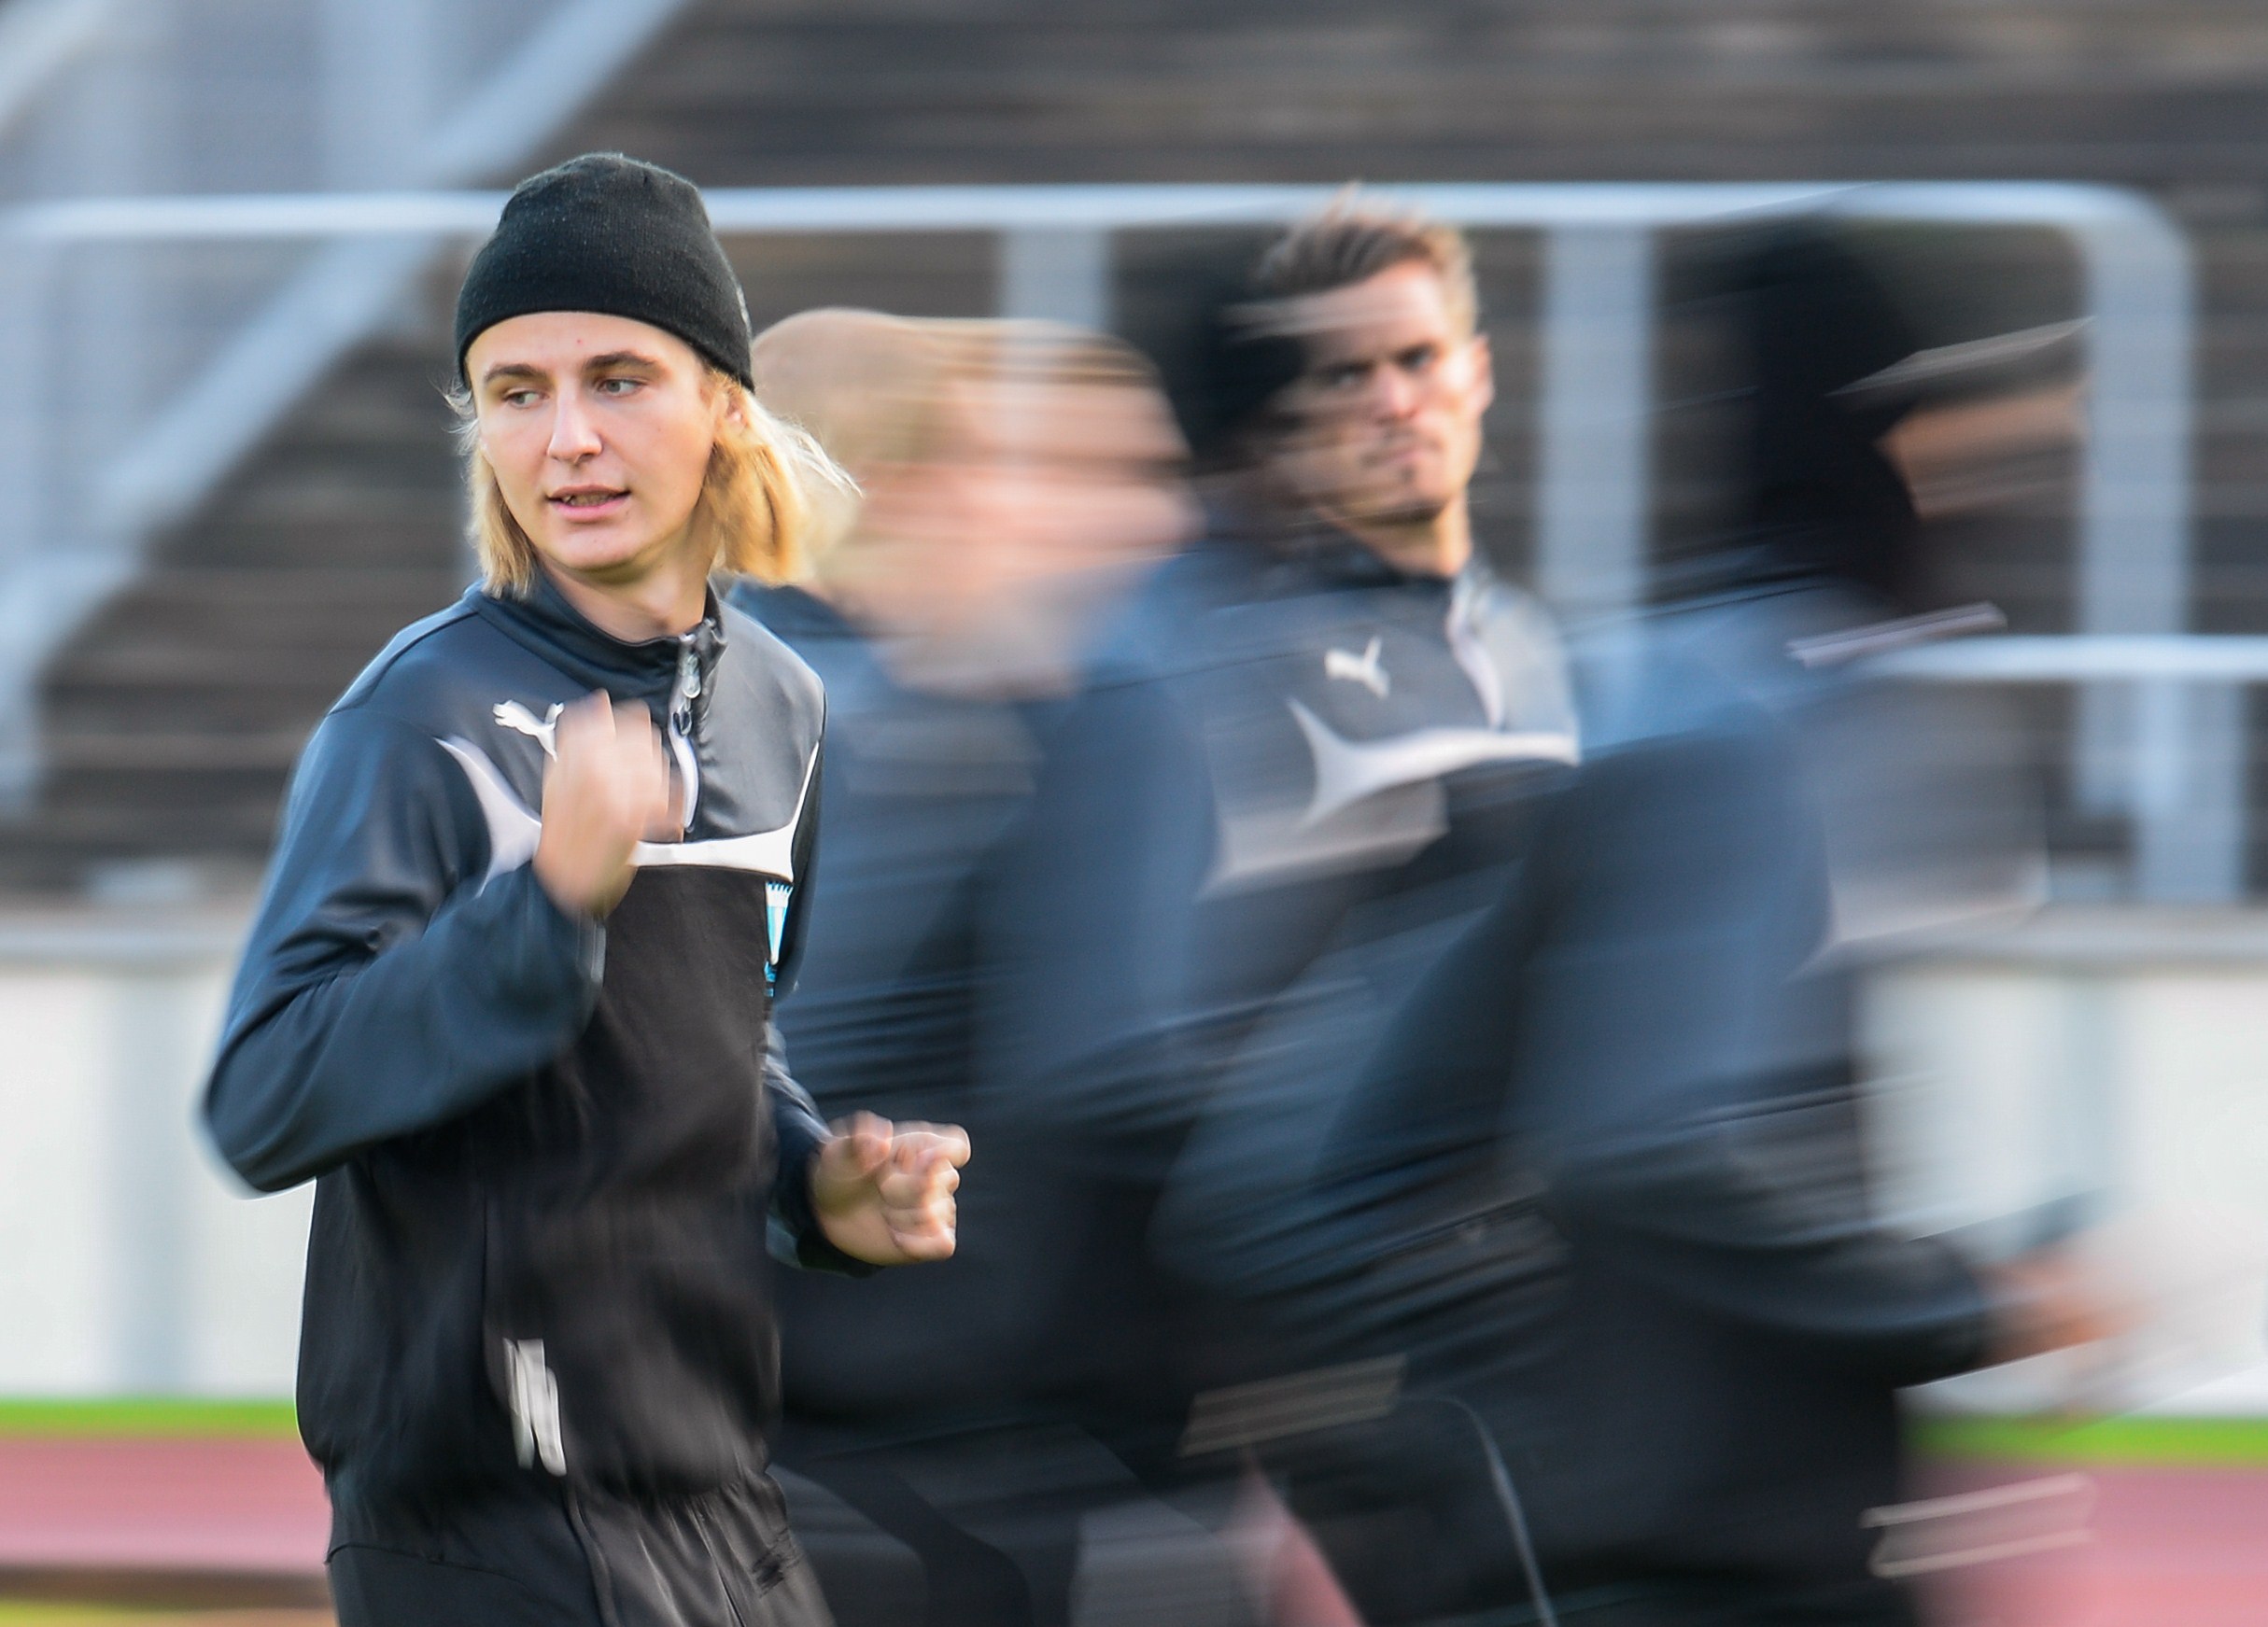 Malmo's midfileder Pawel Cibicki (L) warms up together with his teammates during a training session at the Malmo Stadion on November 3, 2014 on the eve of the UEFA Champions League group A football match between Malmo FF and Club Atletico de Madrid. AFP PHOTO / JONATHAN NACKSTRAND        (Photo credit should read JONATHAN NACKSTRAND/AFP/Getty Images)